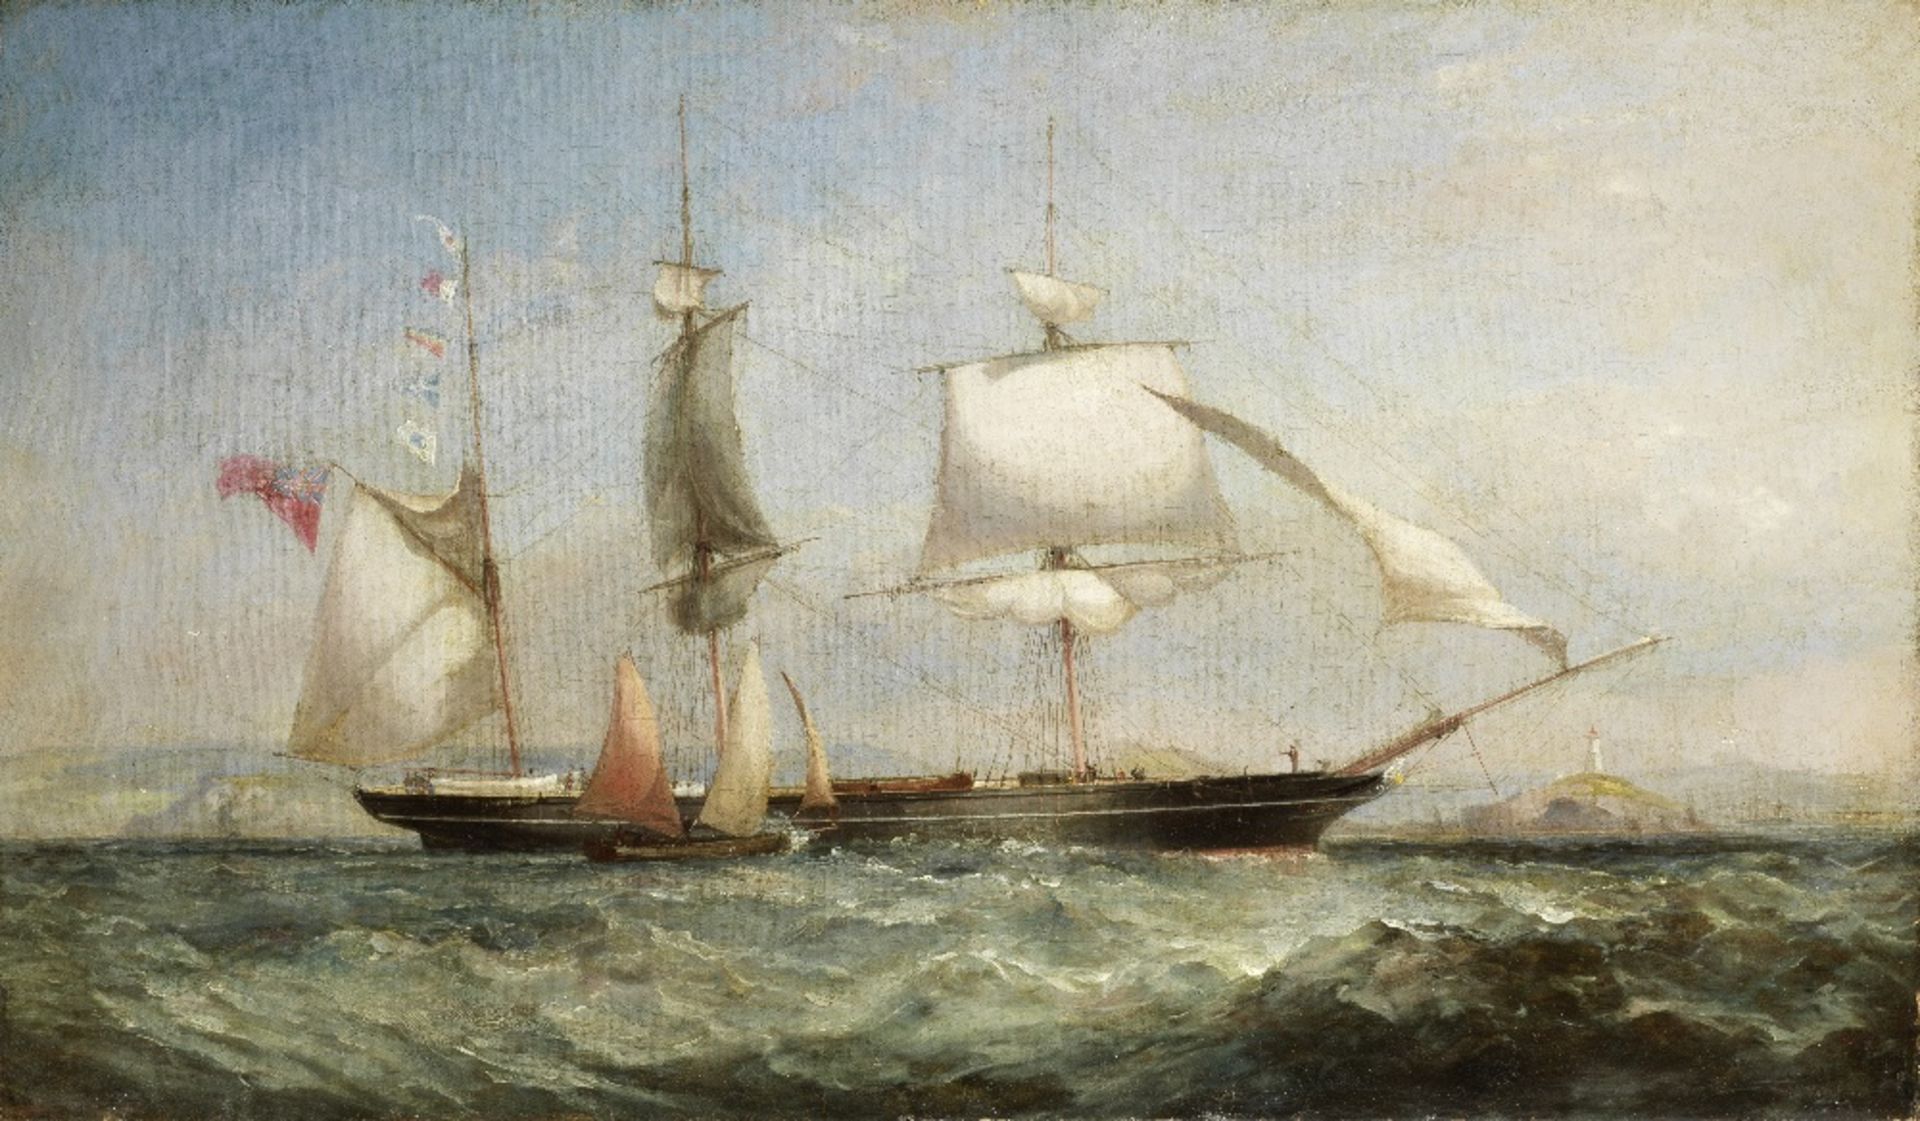 James Harris of Swansea (British, 1810-1887) The barque Ethelbert hove to for the pilot which is...